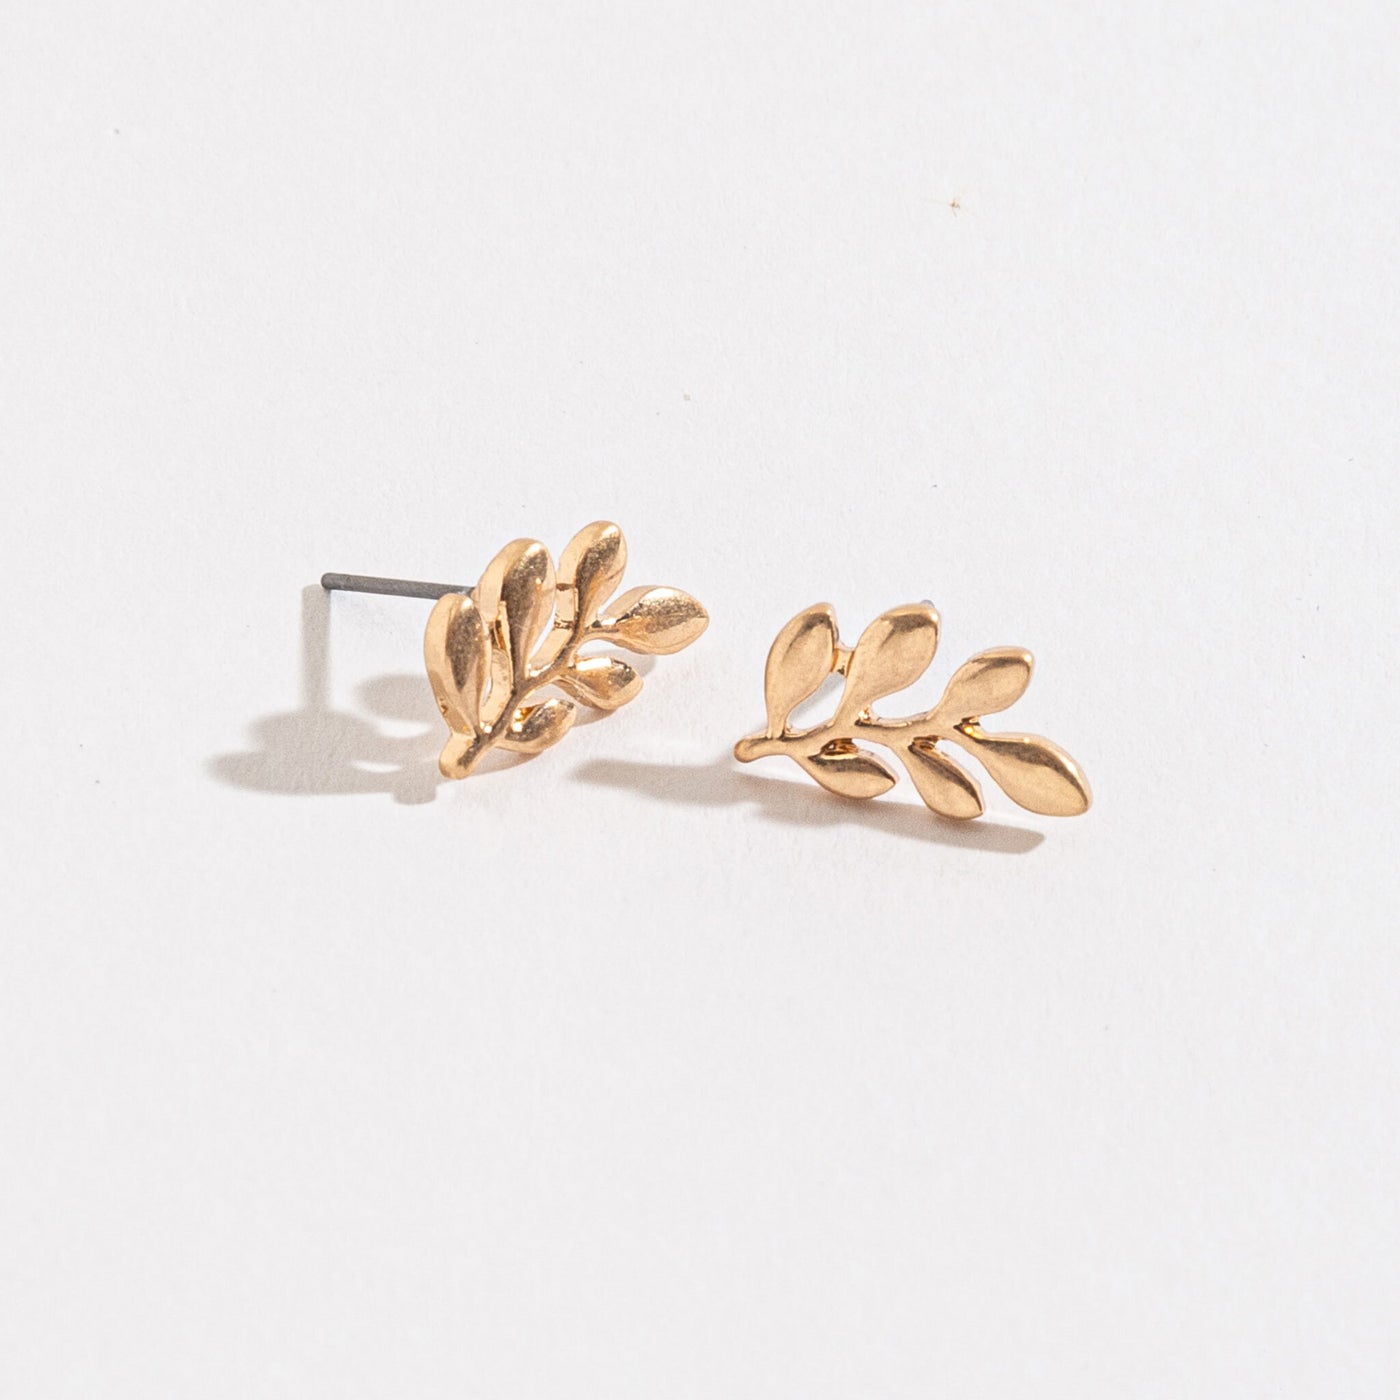 gold leaf stud earrings on a white background